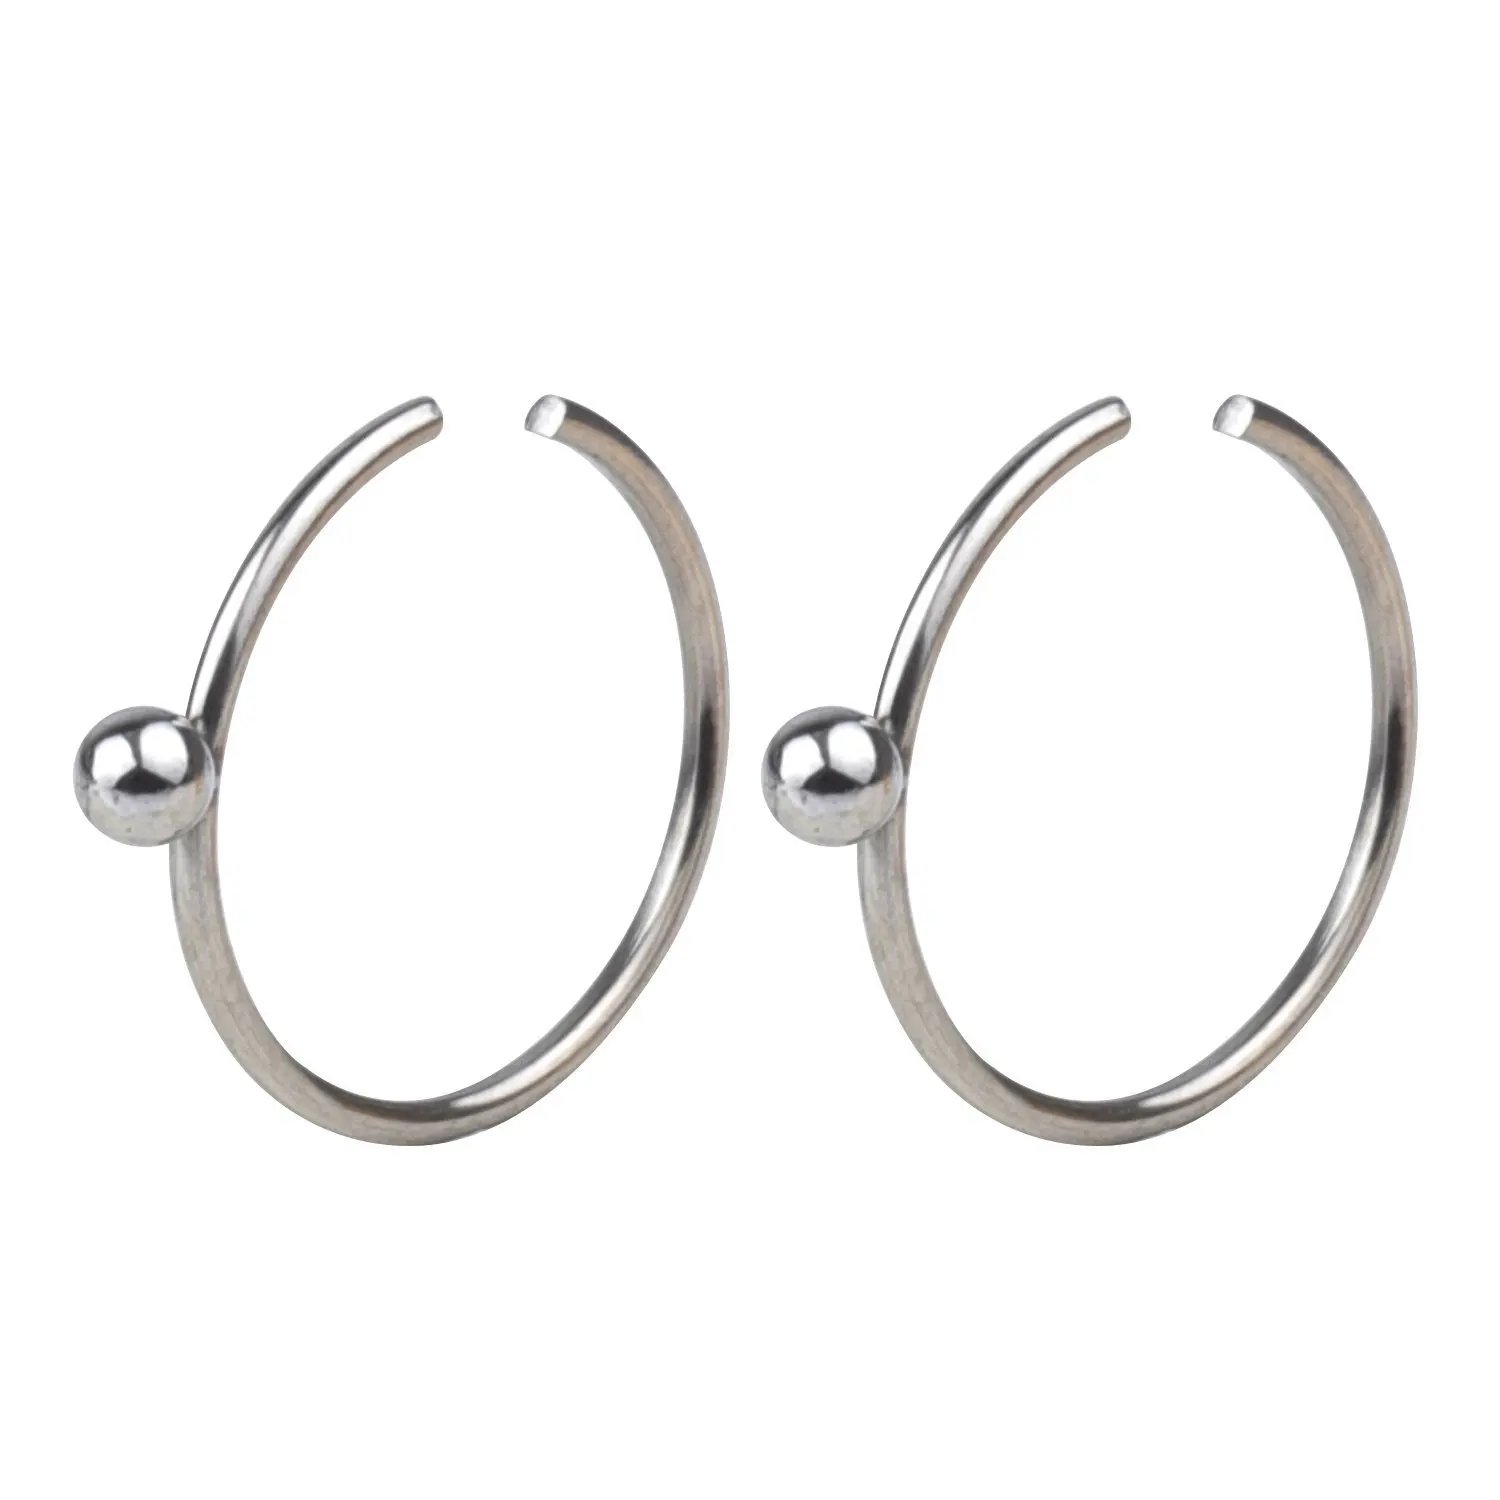 Buy Great my shop 22G Surgical Stainless Steel Nose Ring Hoop Cartilage Surgical Stainless Steel Nose Rings